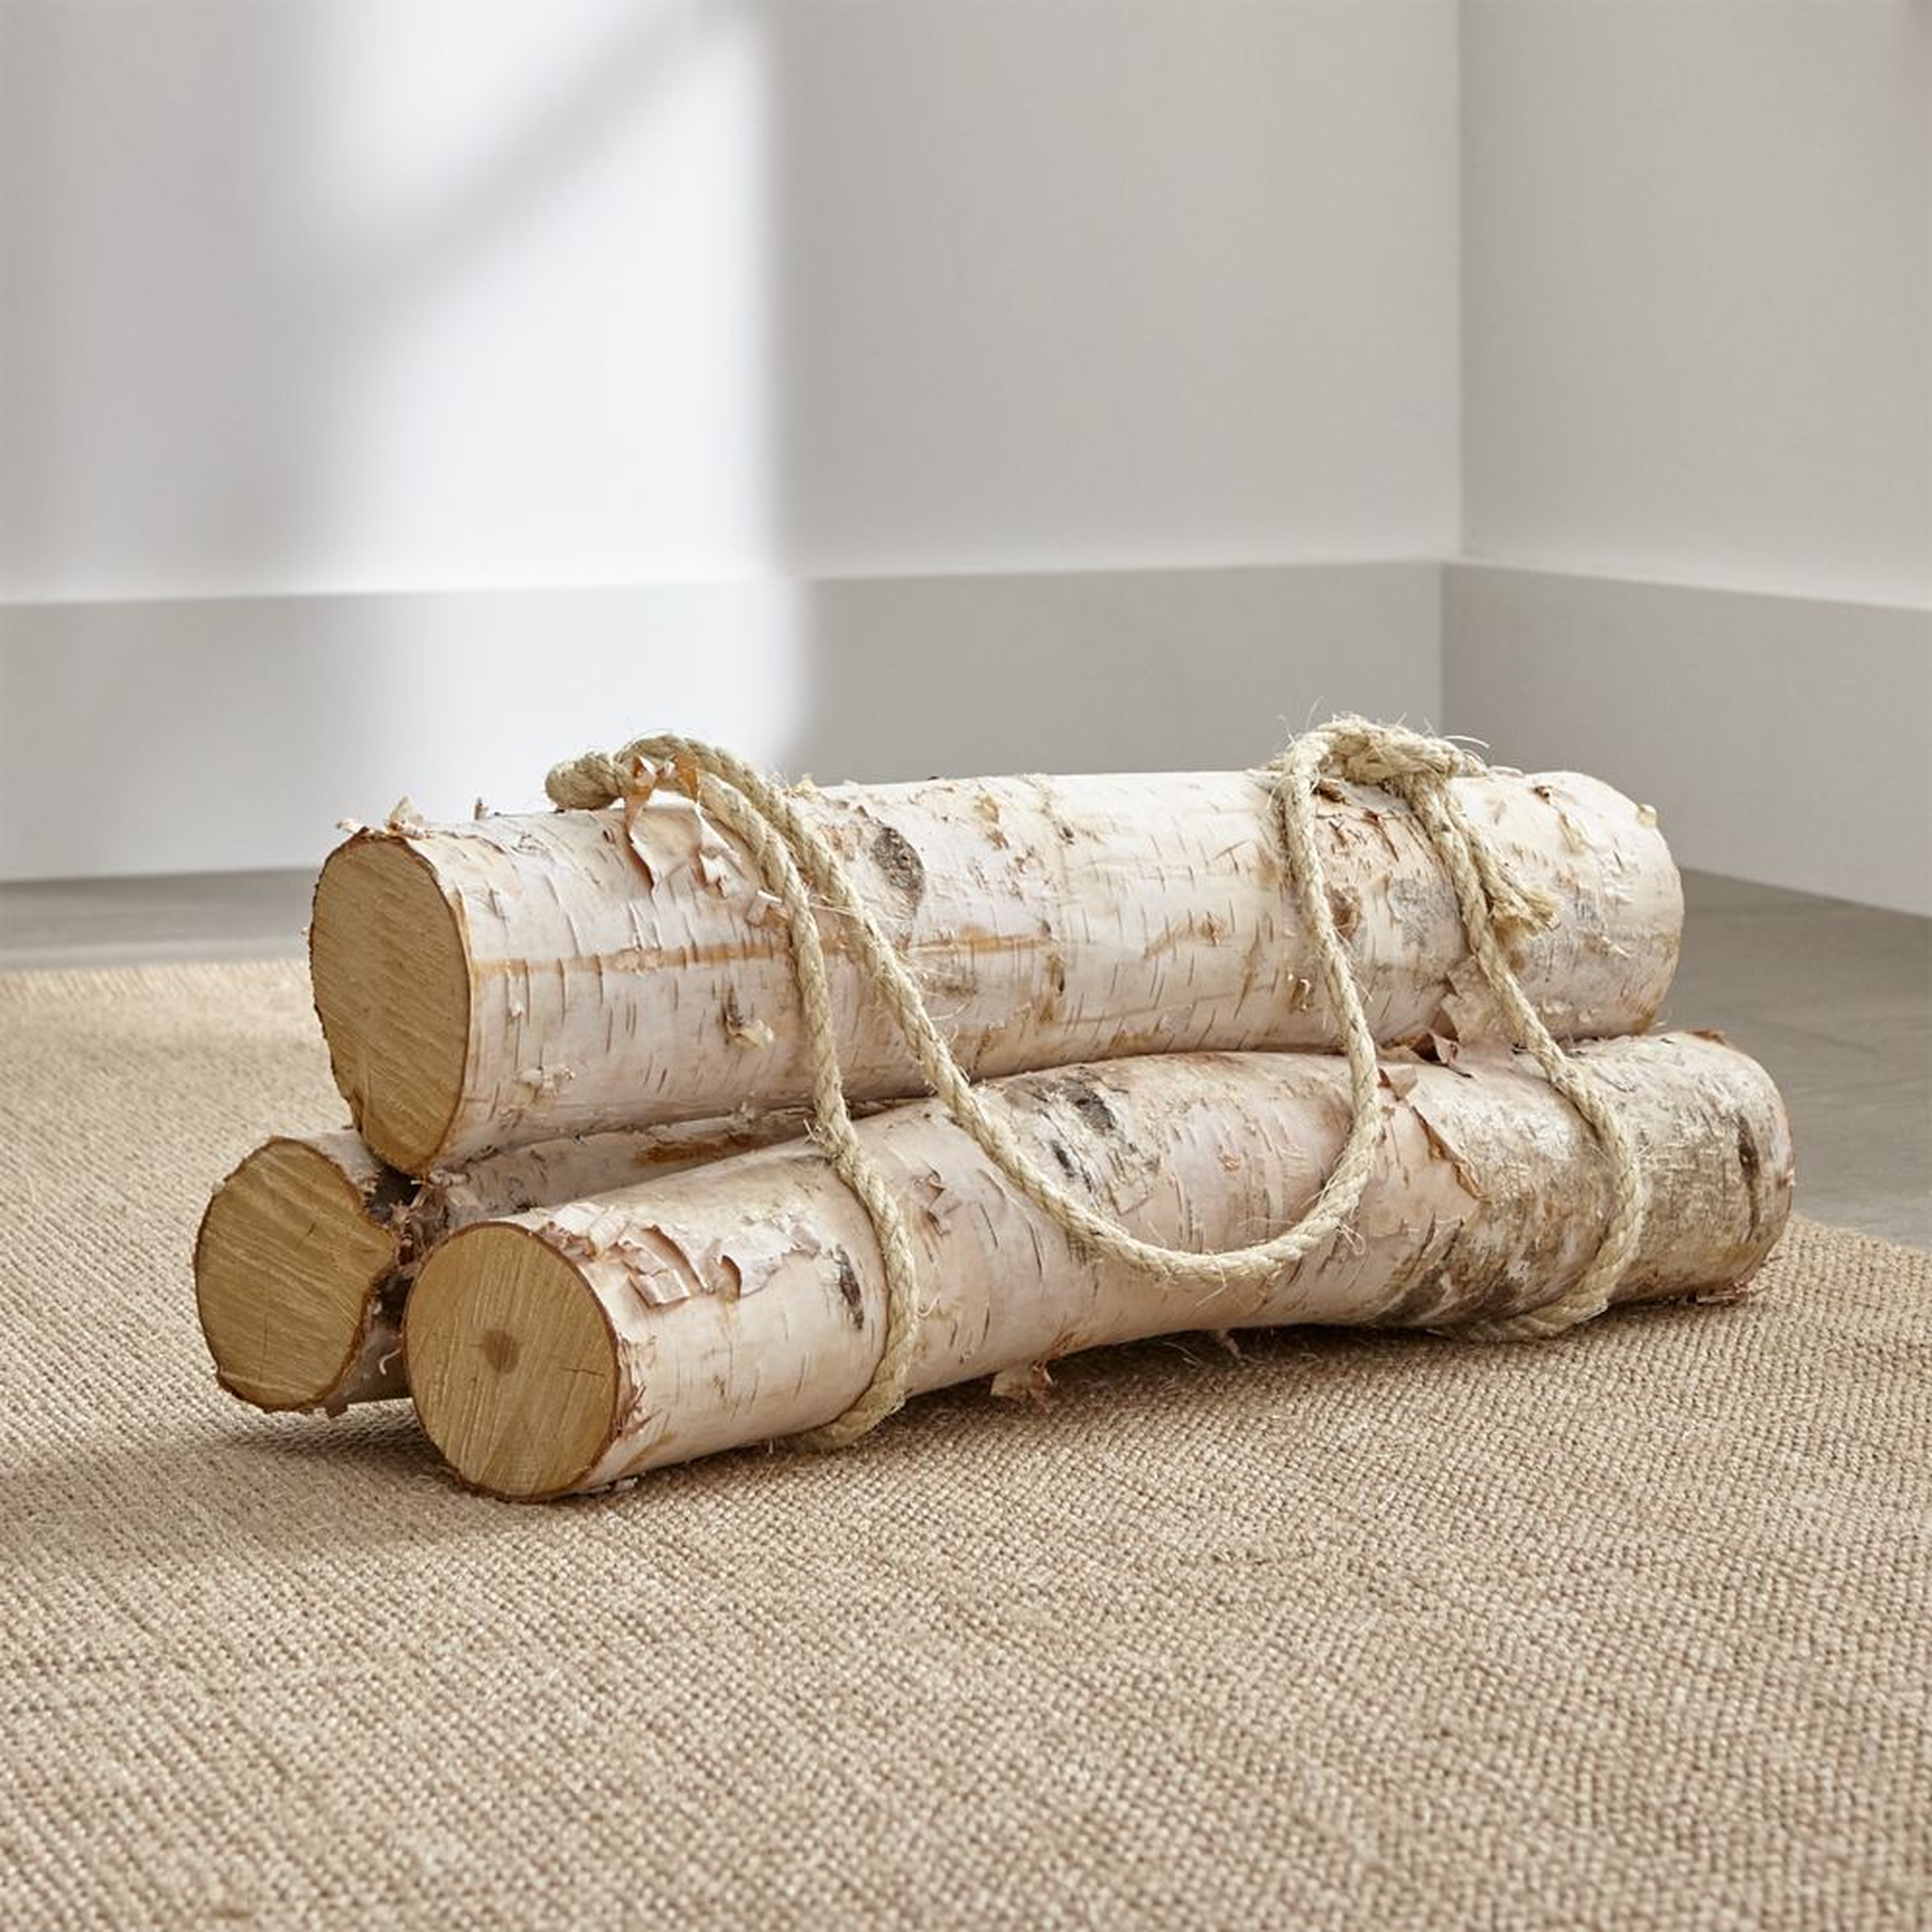 Birch Logs, Set of 3 - Crate and Barrel